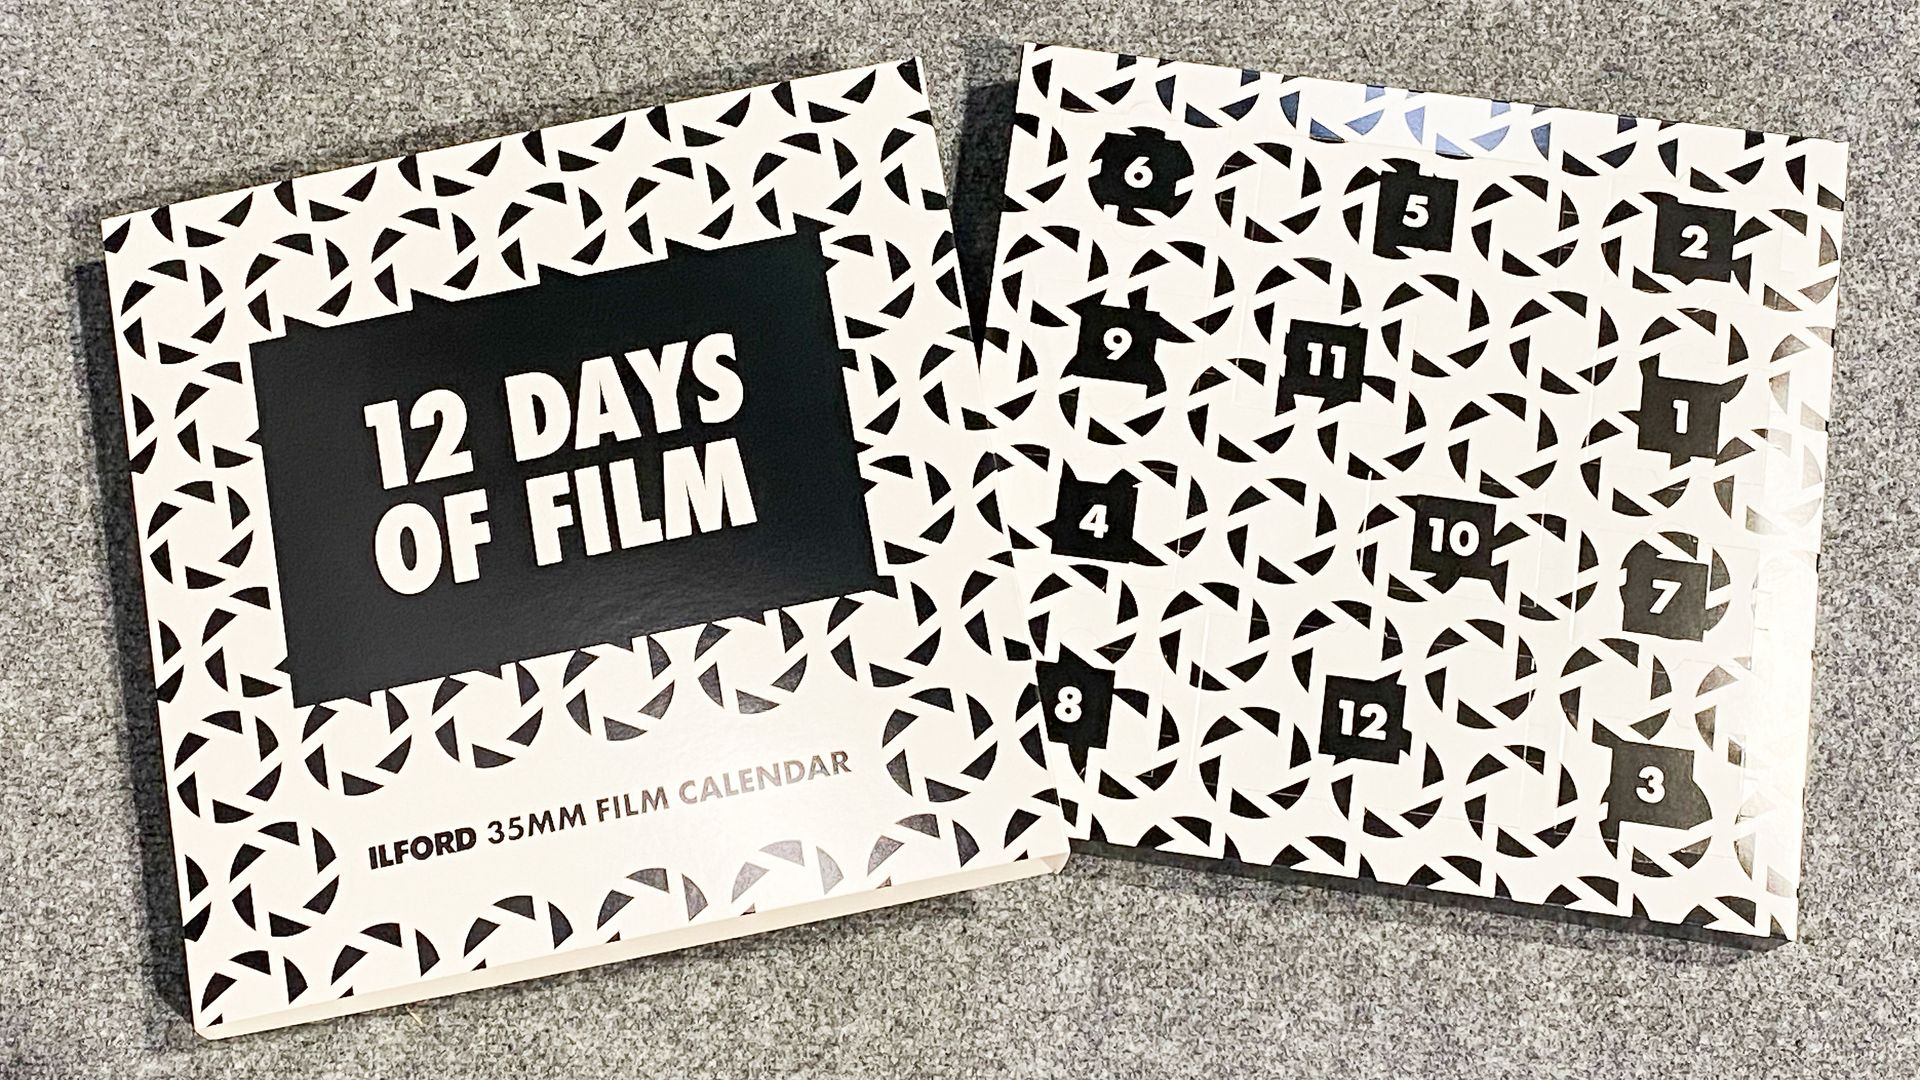 Ilford advent calendar is a gift box of delights for analog